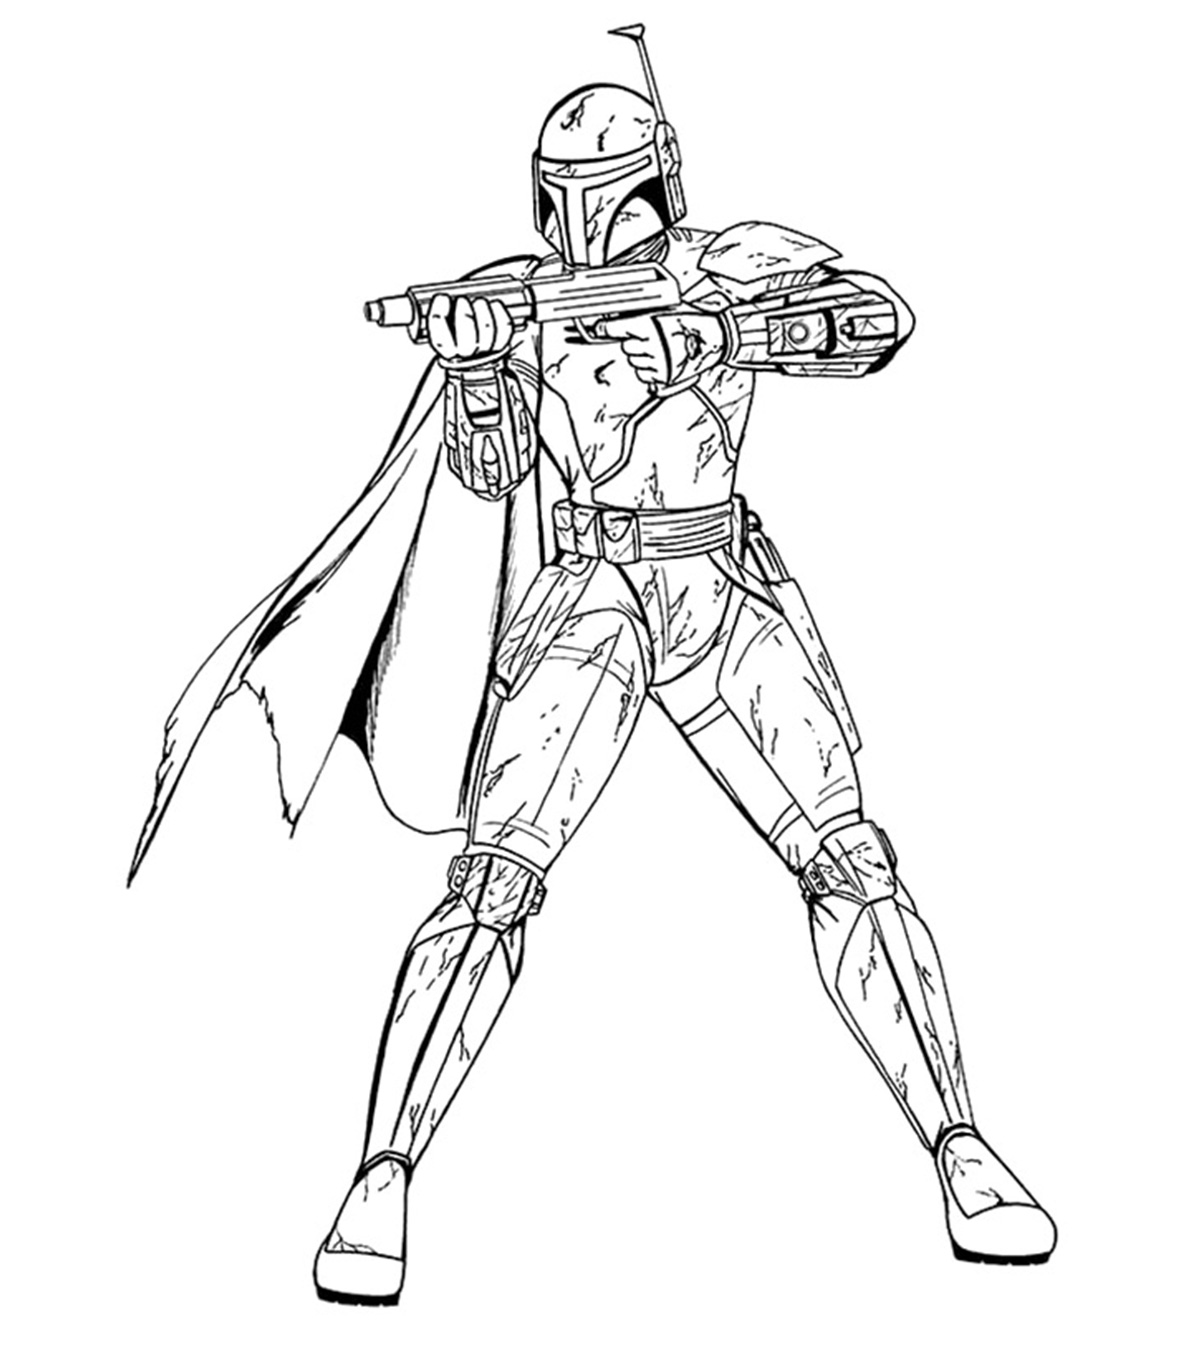 10 Amazing ‘Boba Fett’ Coloring Pages For Your Little Ones